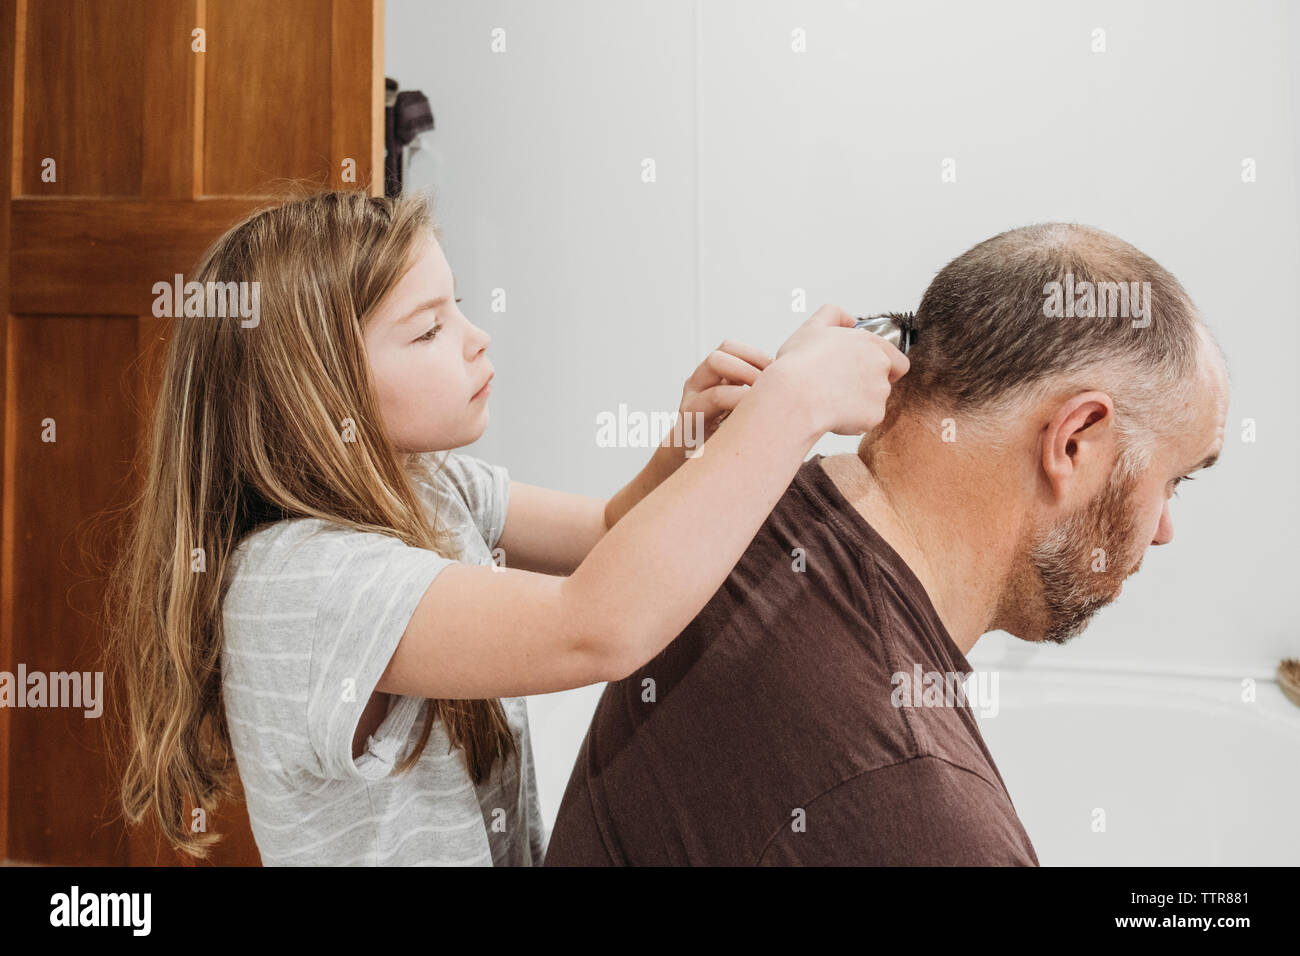 Dad cut daughter's hair because of highlights